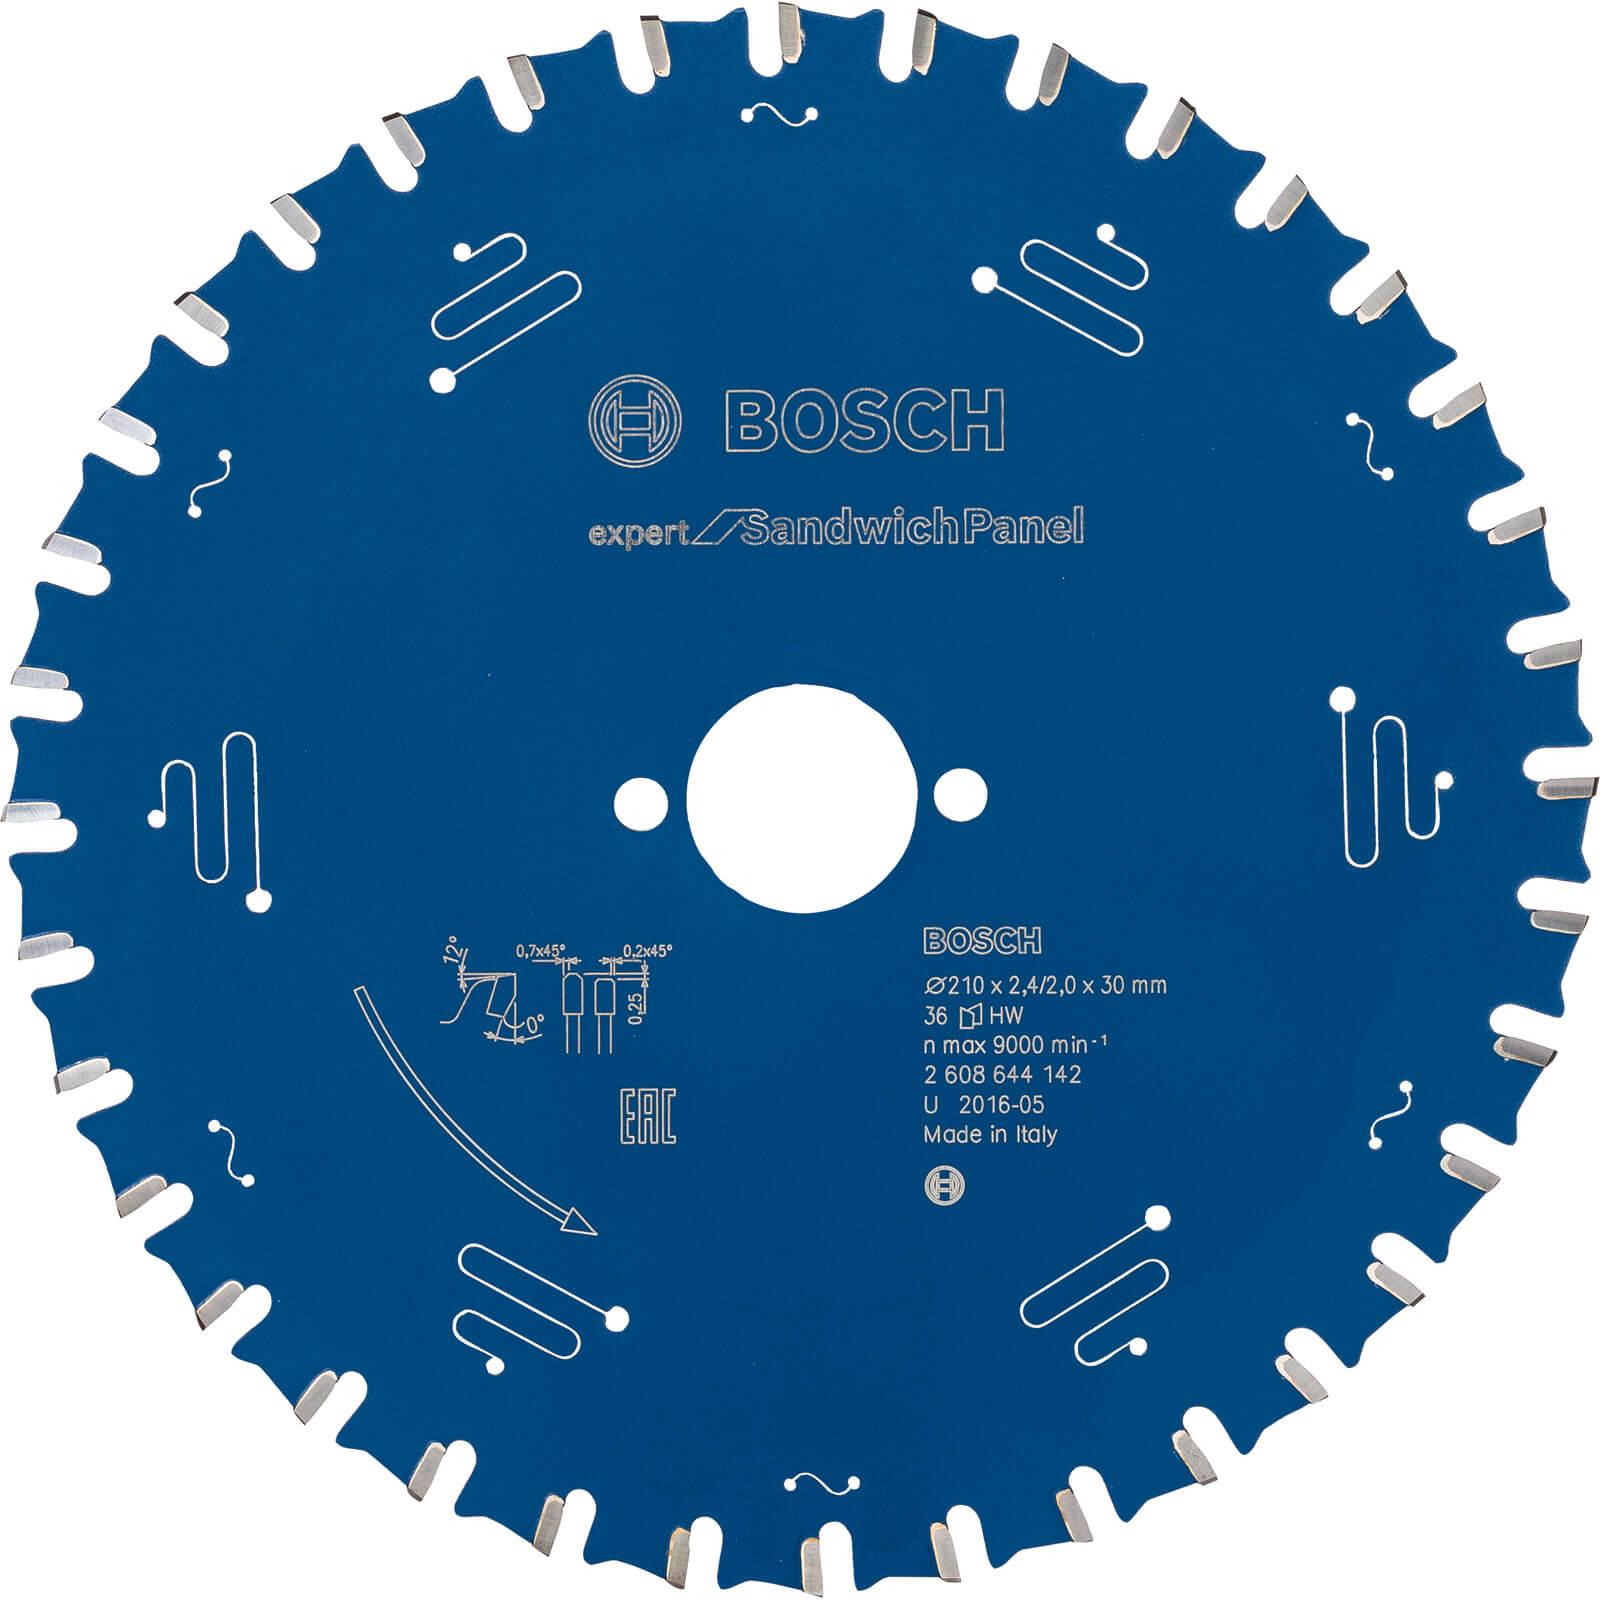 Image of Bosch Expert Circular Saw Blade for Sandwich Panel 210mm 36T 30mm